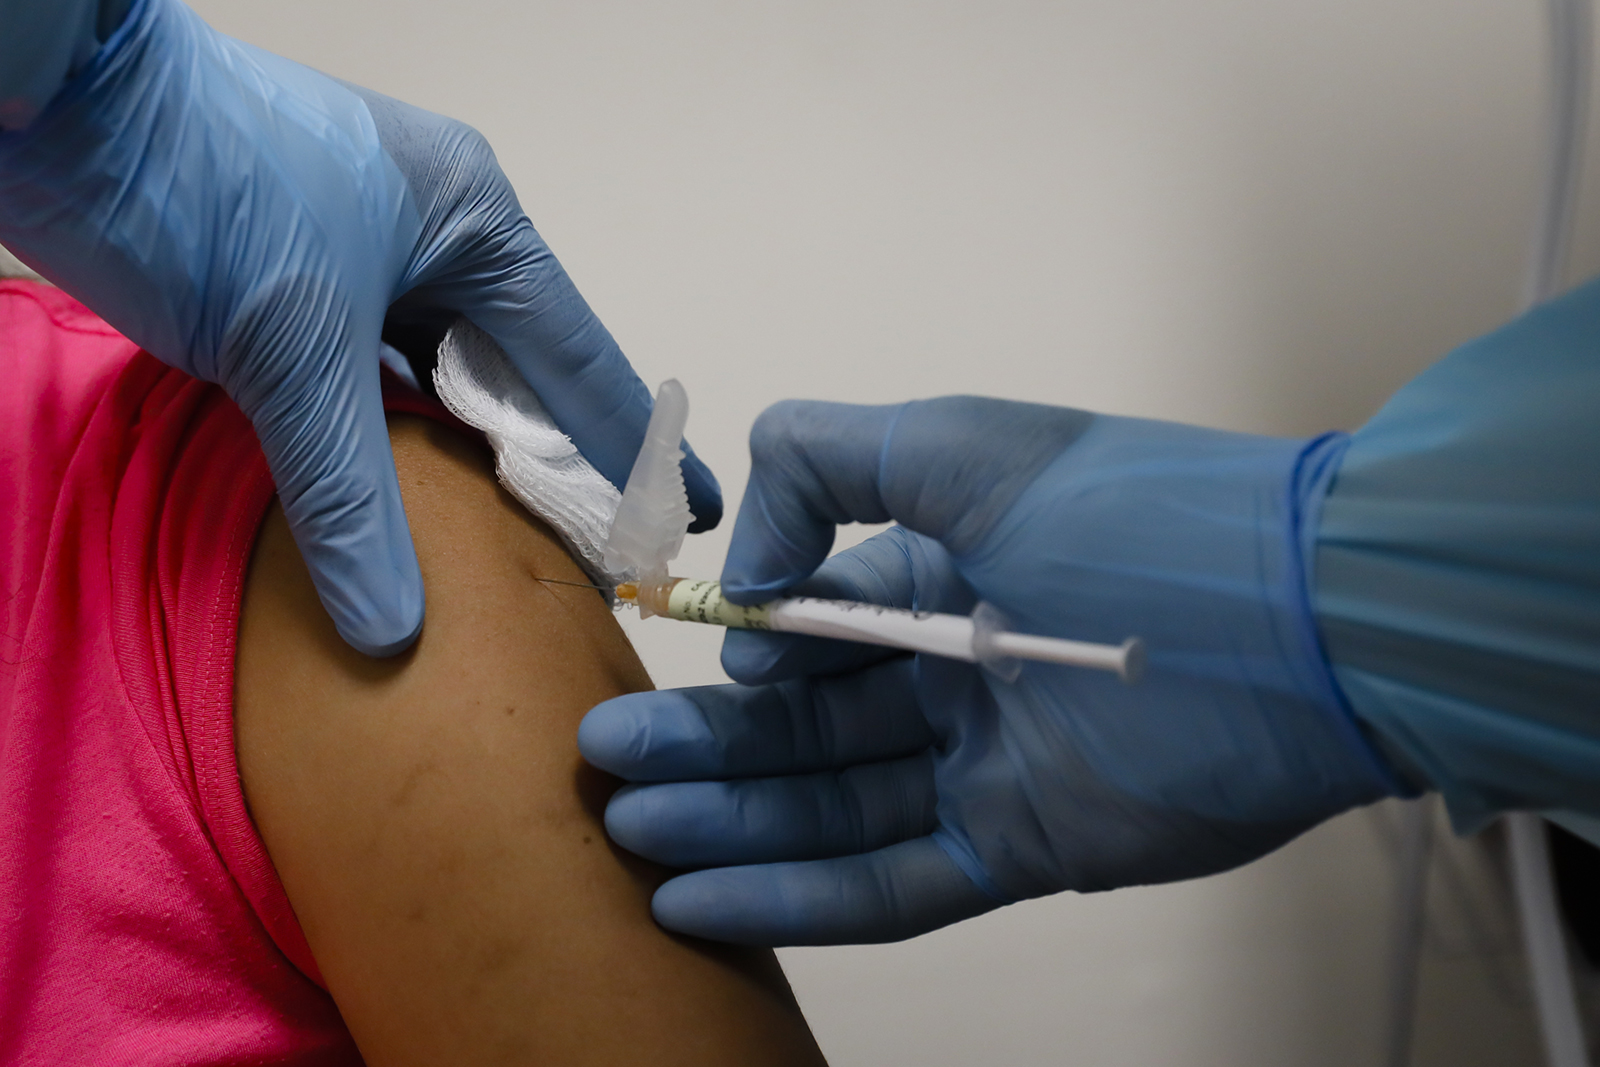 A health worker injects a woman during clinical trials for a Covid-19 vaccine at Research Centers of America in Hollywood, Florida, on September 9.